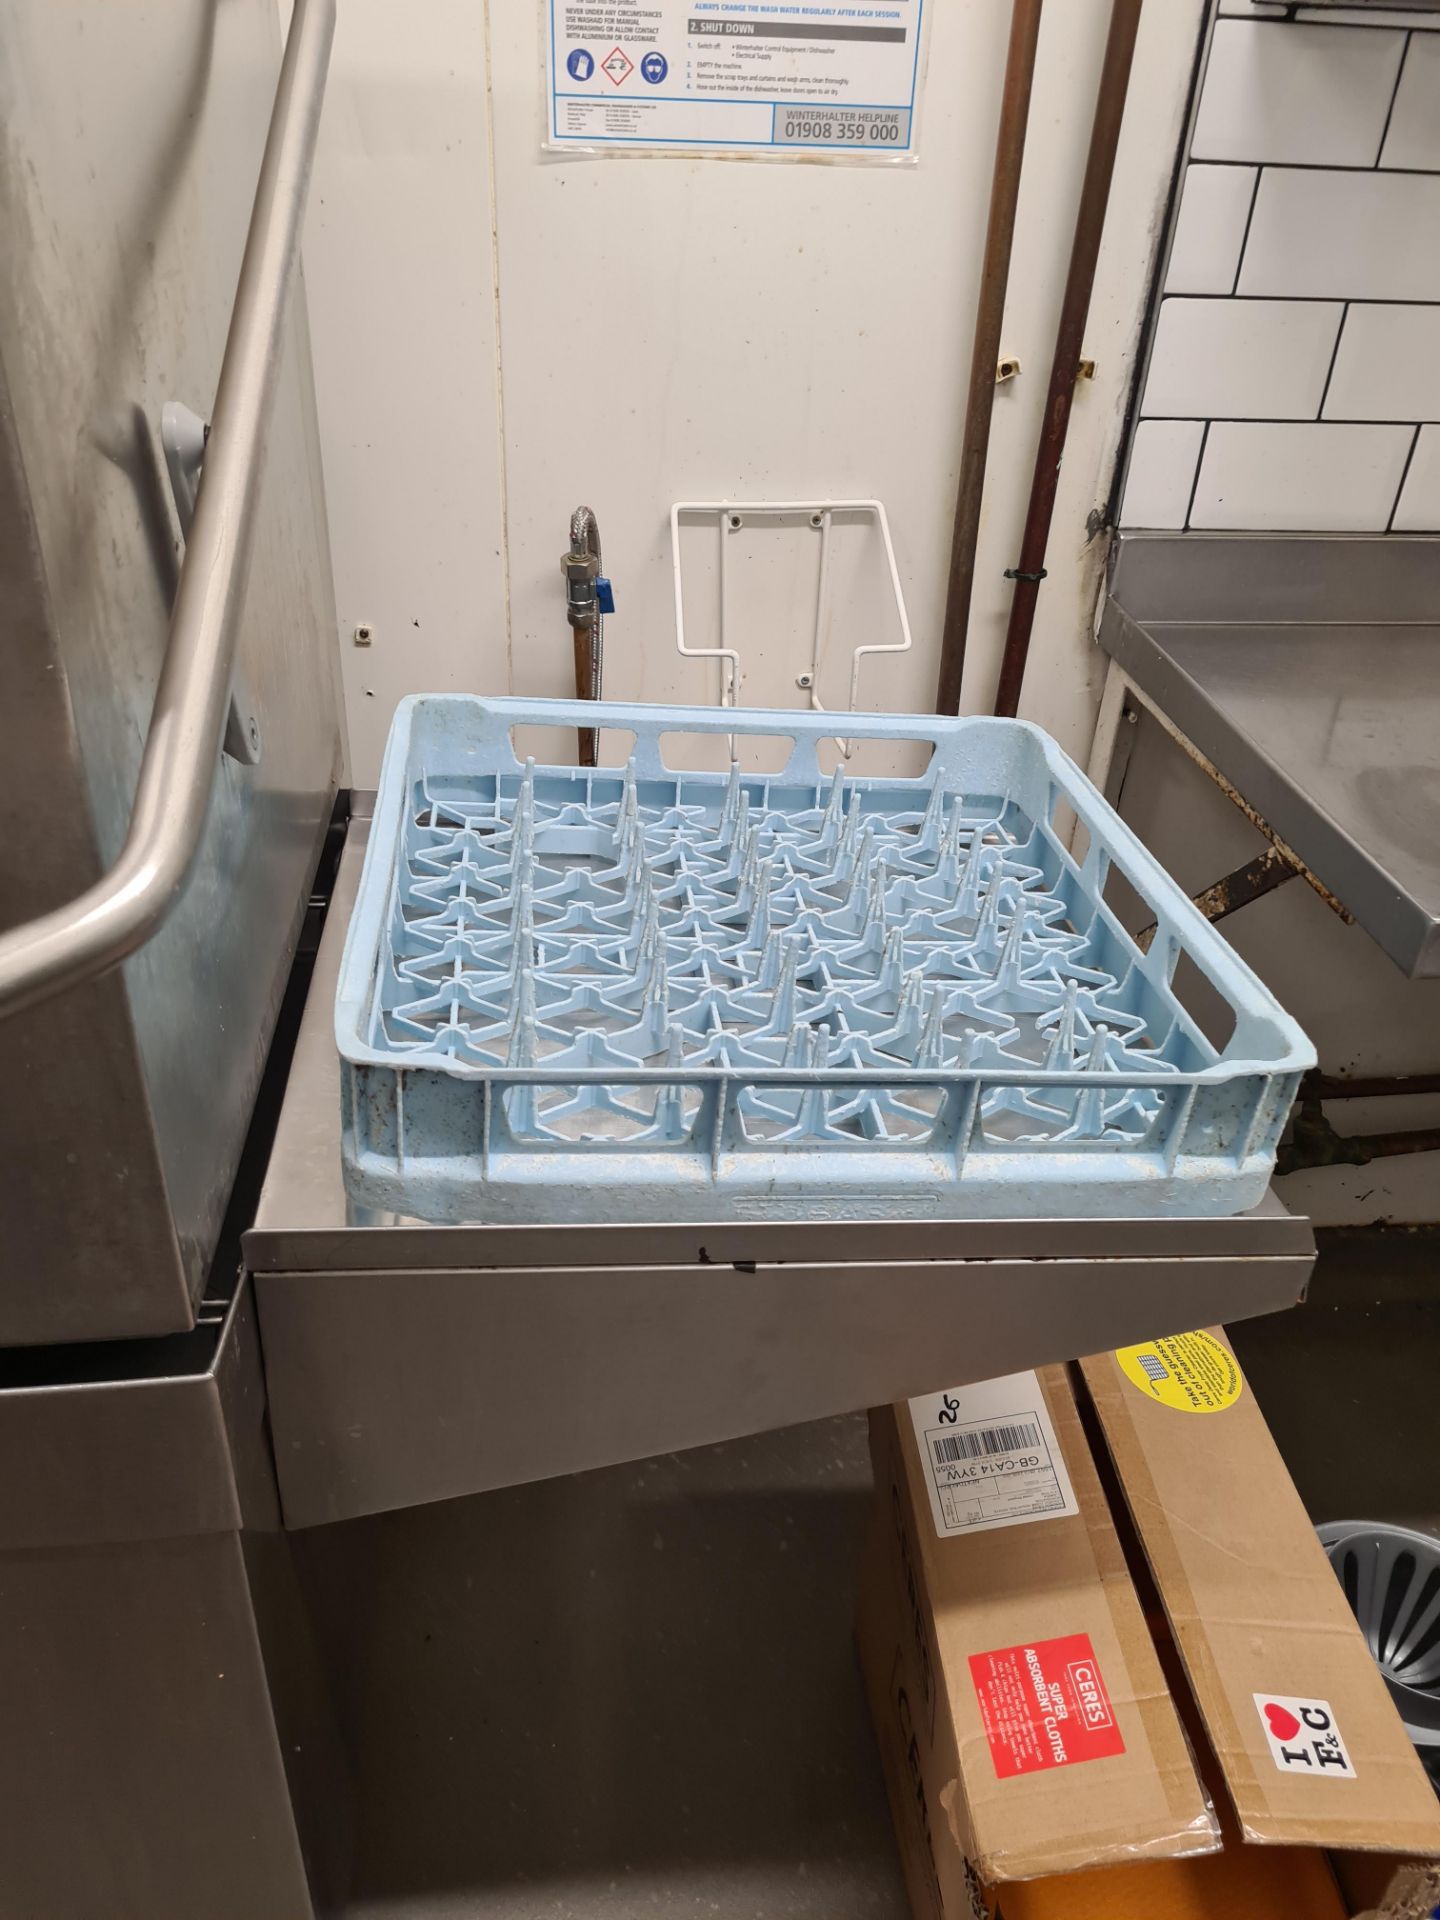 HOBART Bar Aid Stainless Steel Dish Washer c/w Stainless Steel Side Shelf and Stainless Steel Single - Image 4 of 4